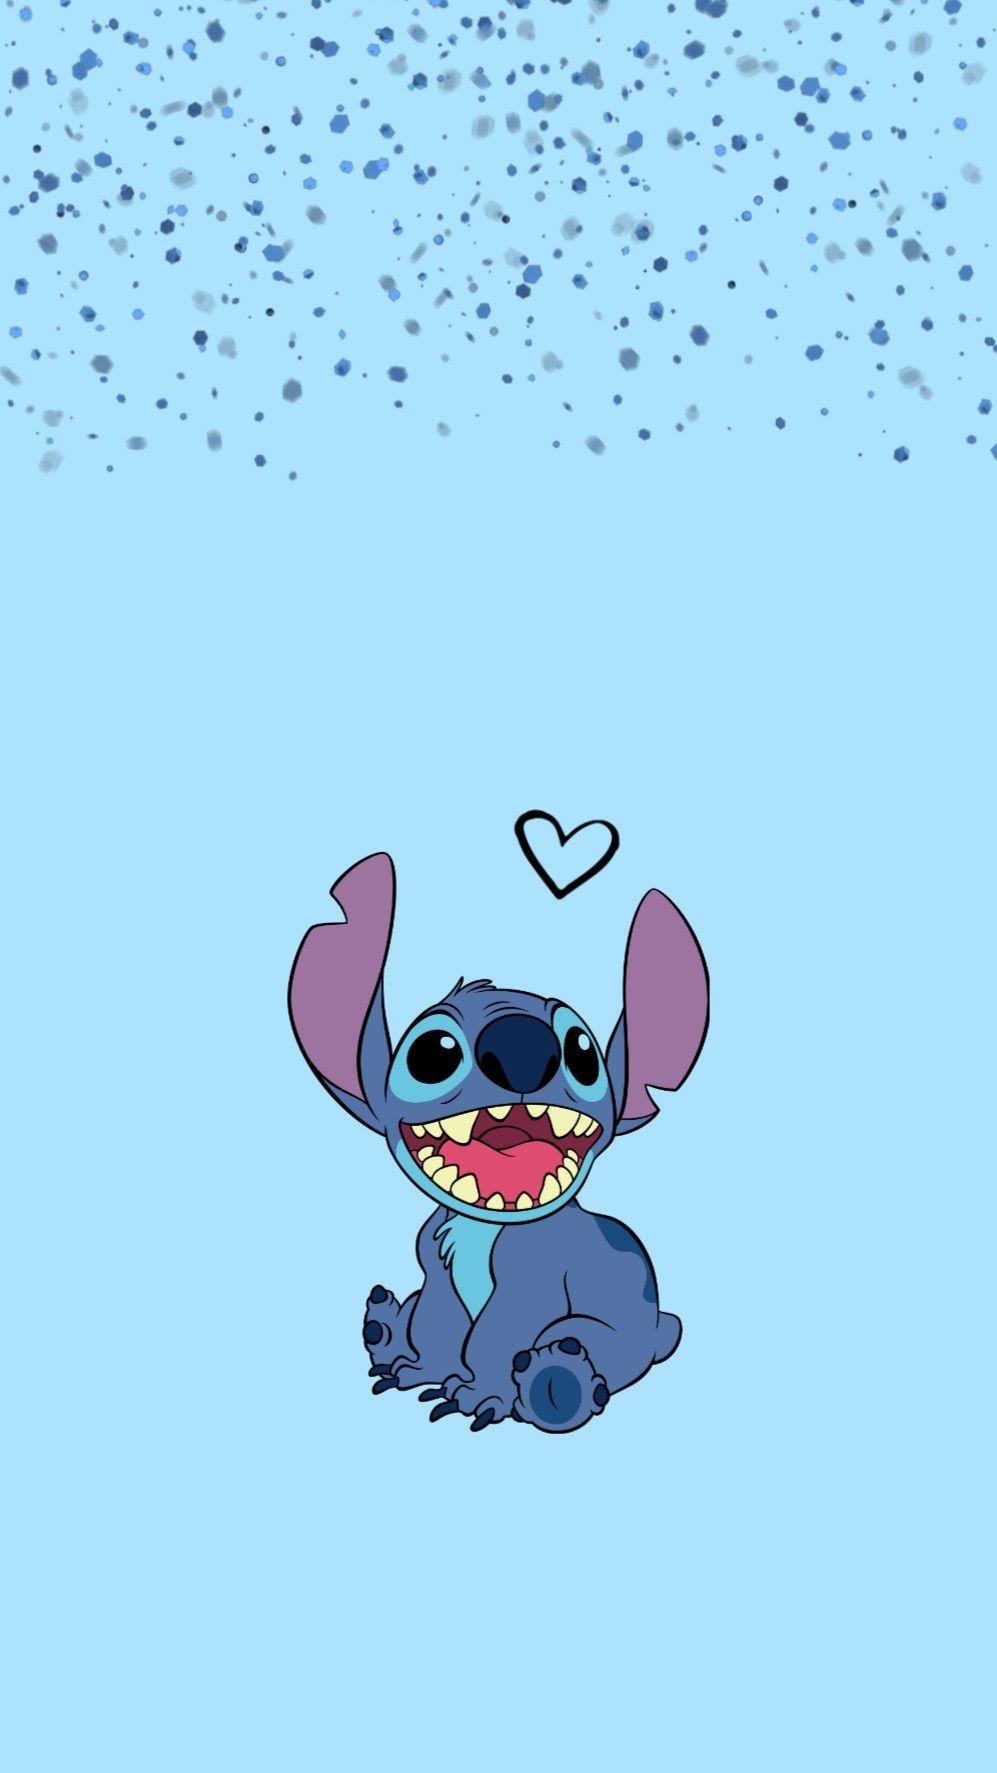 Aesthetic Stitch Disney Wallpapers - Top Free Aesthetic Stitch Disney ...